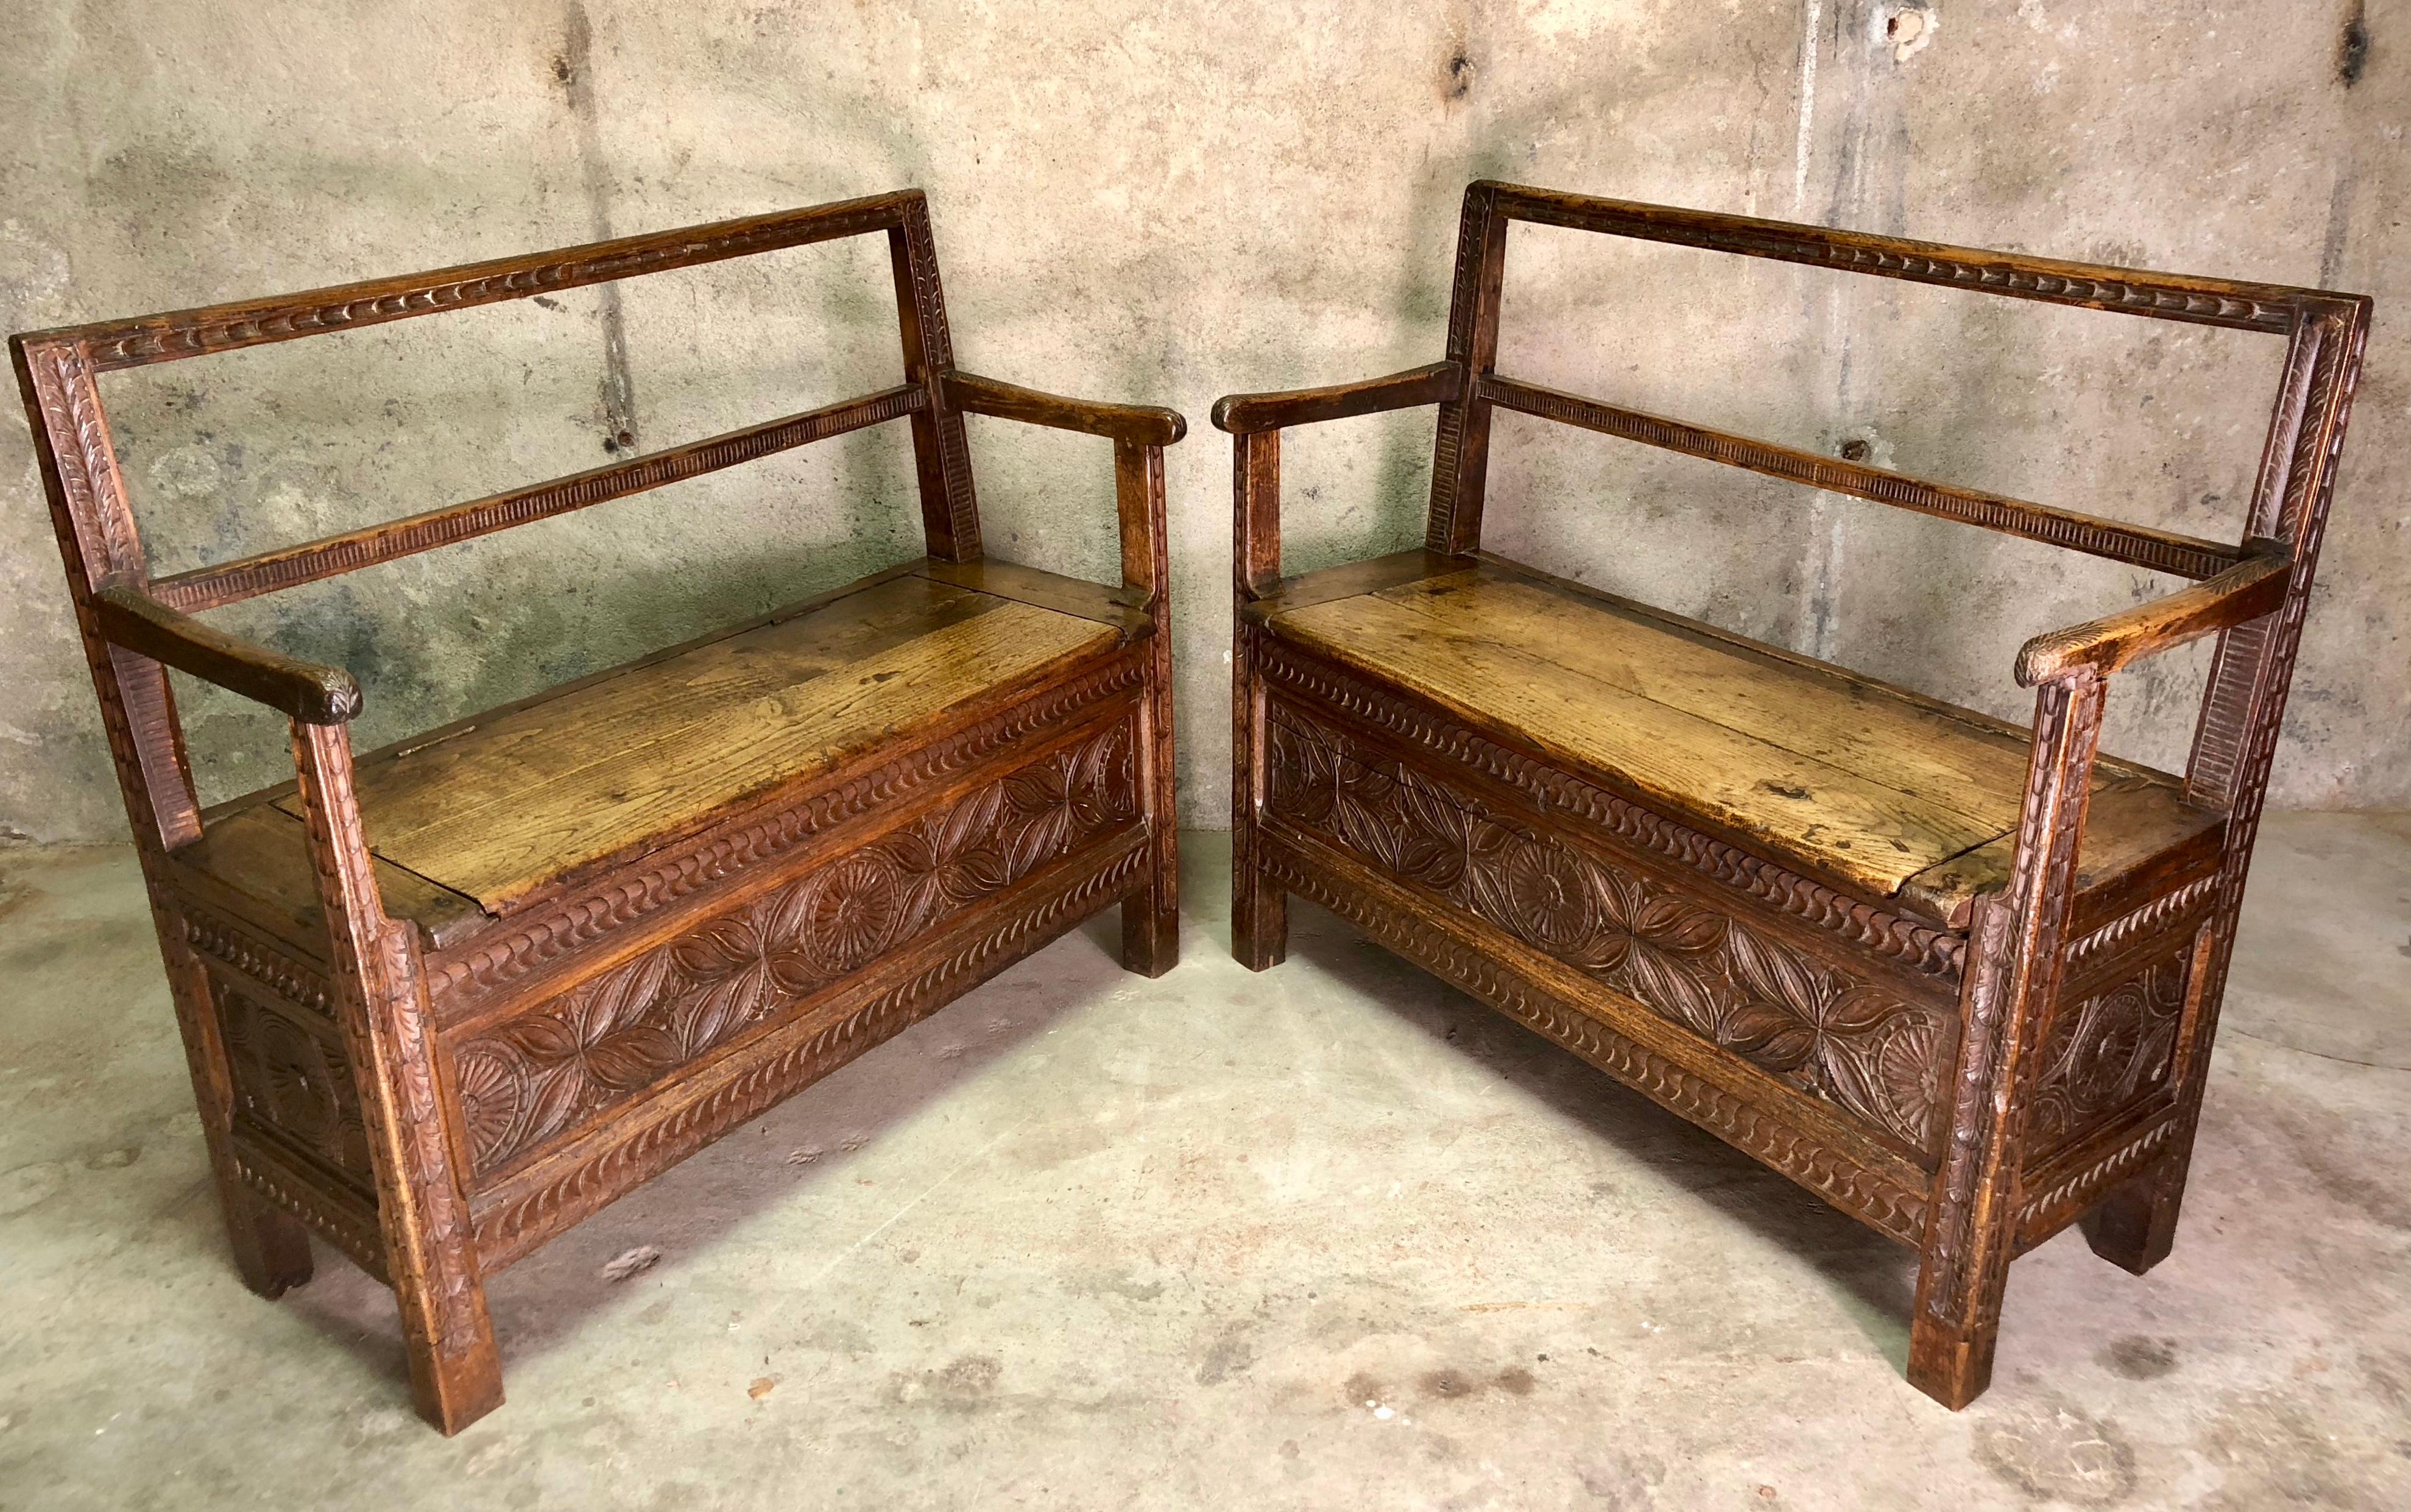 Rustic Pair of French Breton Wooden Bench Chests, circa 19th Century